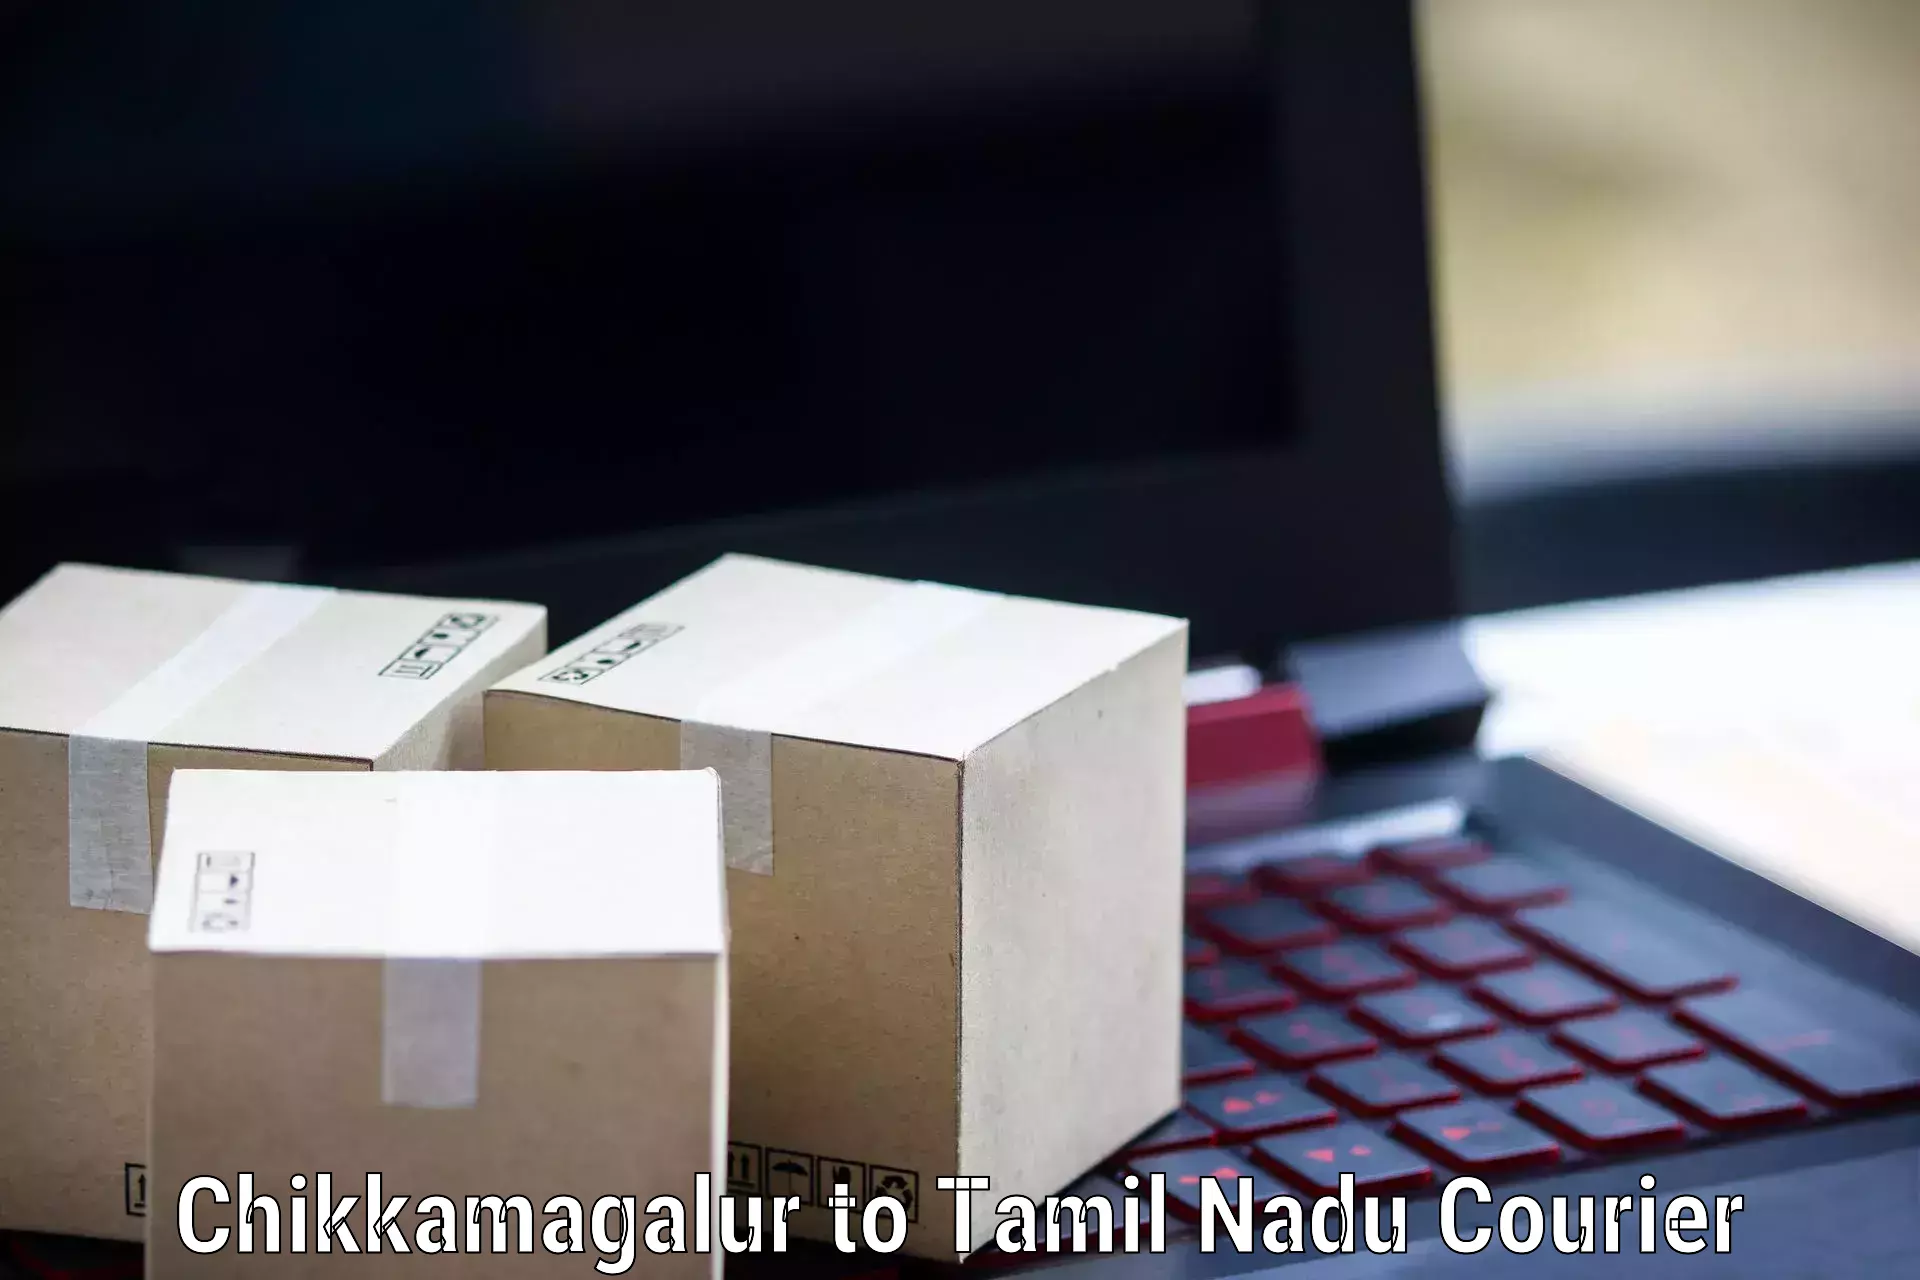 Courier service partnerships Chikkamagalur to Usilampatti